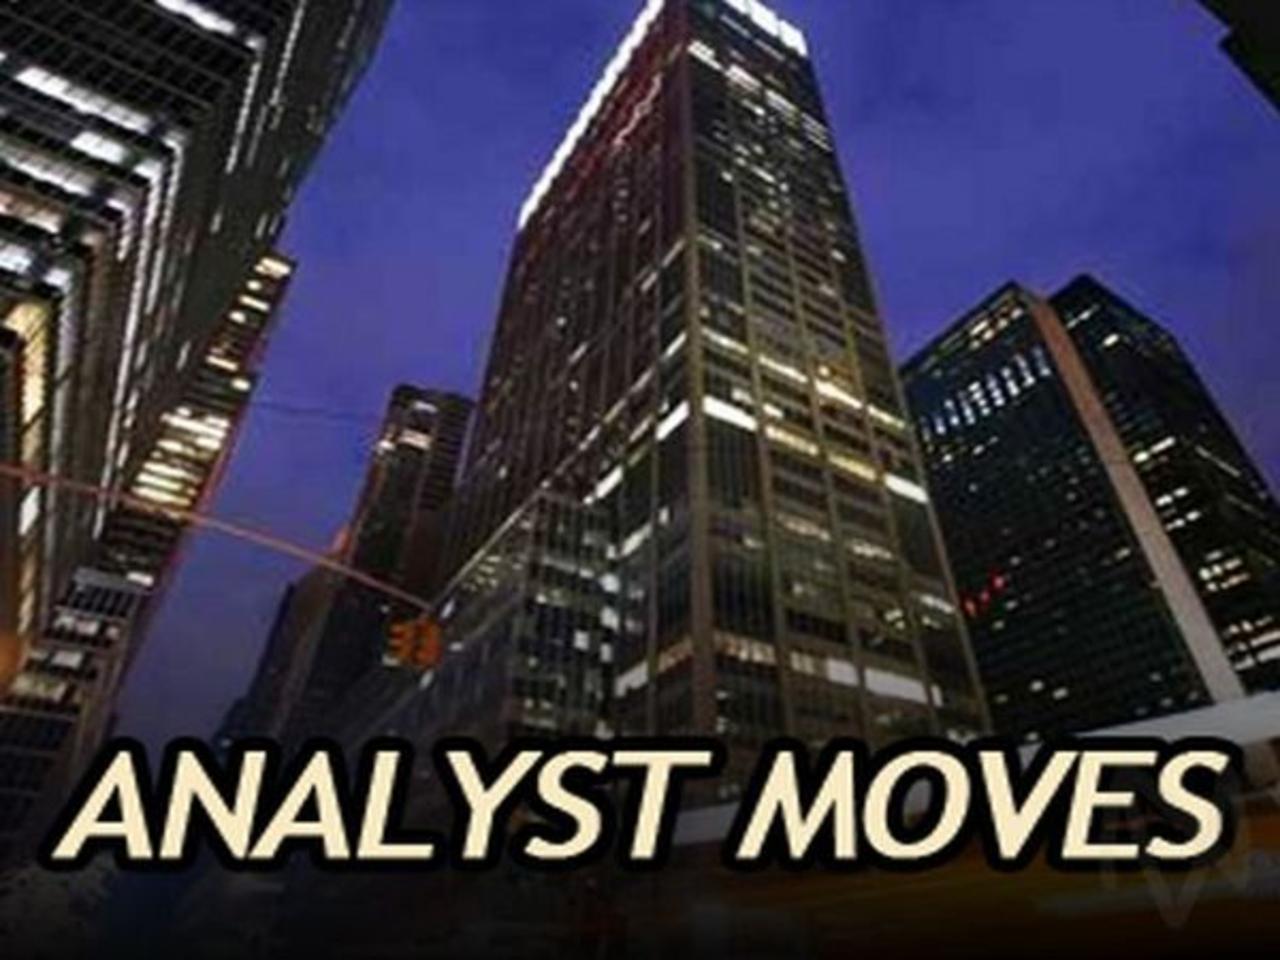 Dow Analyst Moves: WMT